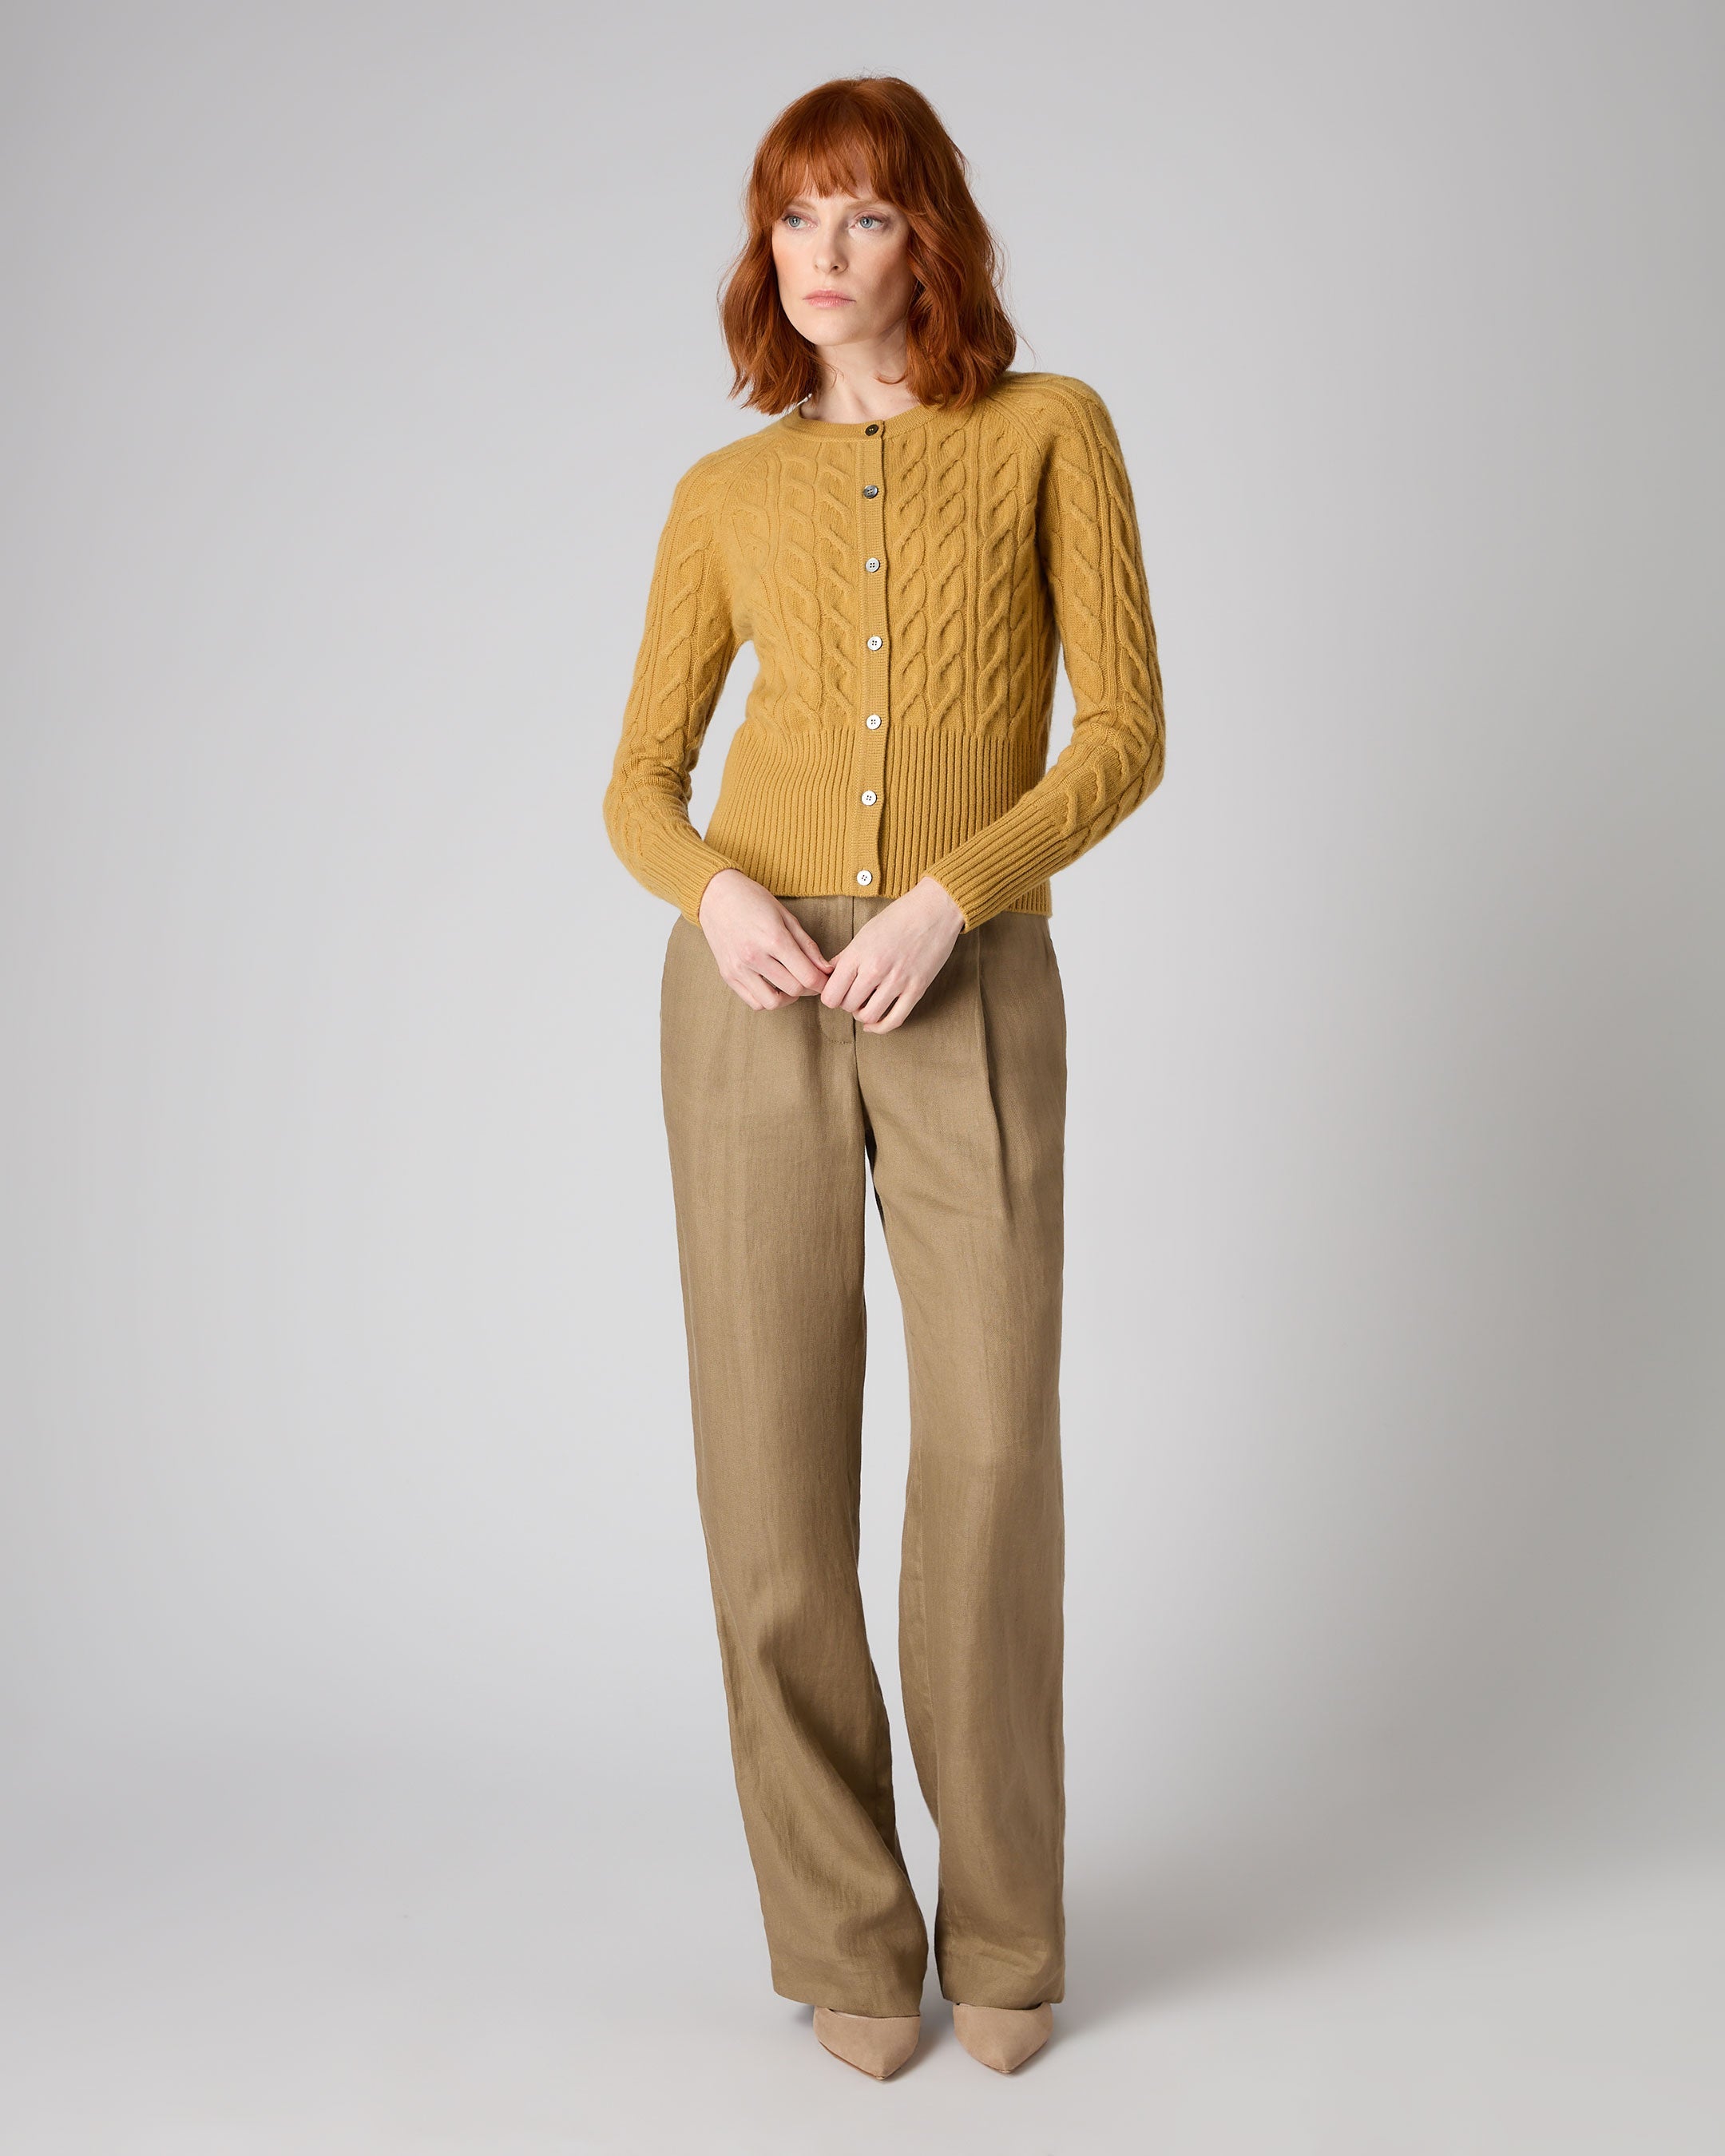 Women's Cable Cashmere Cardigan Baroque Gold | N.Peal